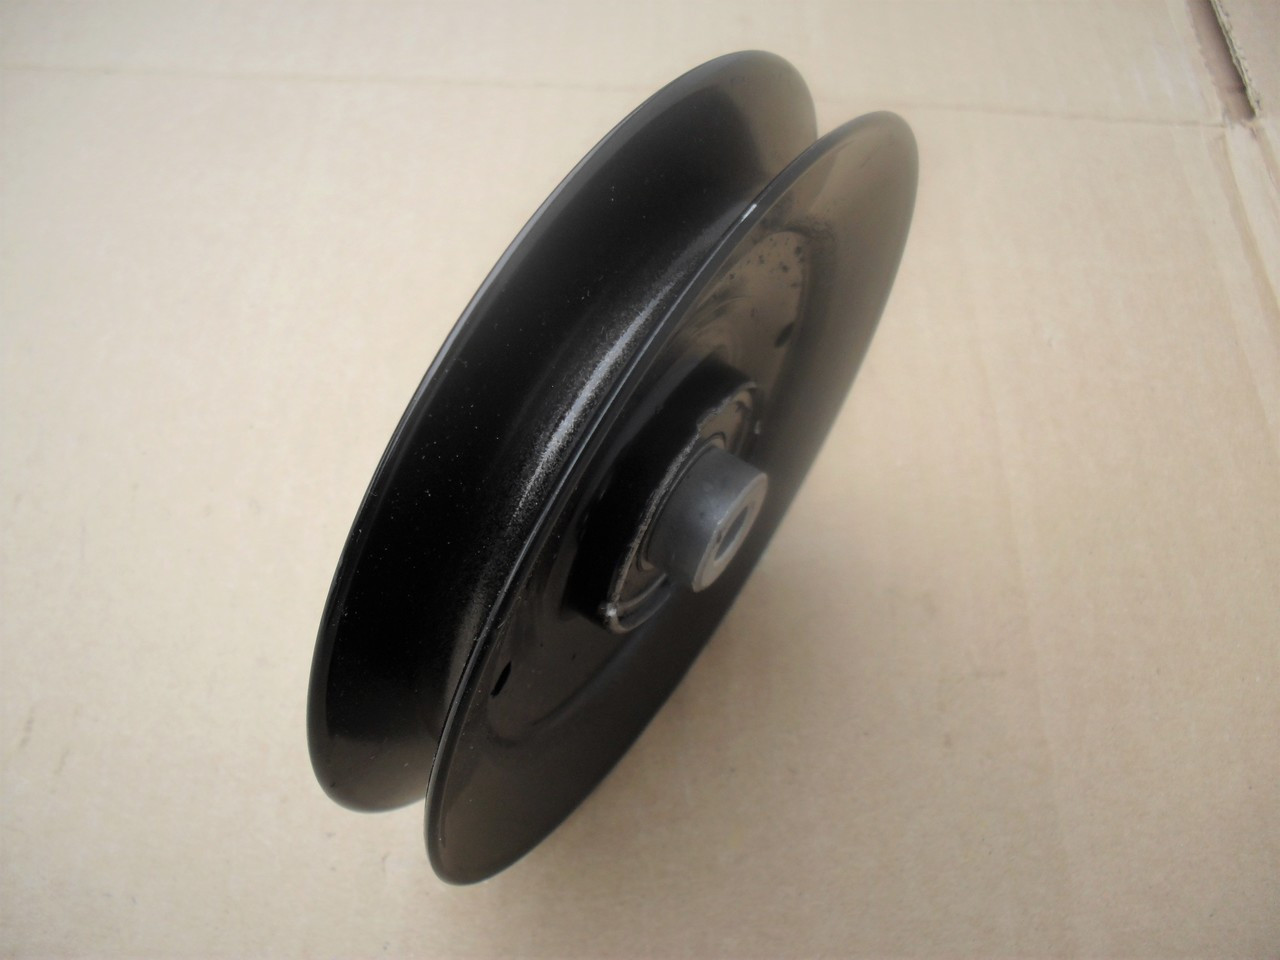 Idler Pulley for Scag Cheetah, Sabre Tooth Tiger, Turf Tiger, V Ride, Wildcat 48181, ID: 3/8", OD: 5", Height: 7/8"